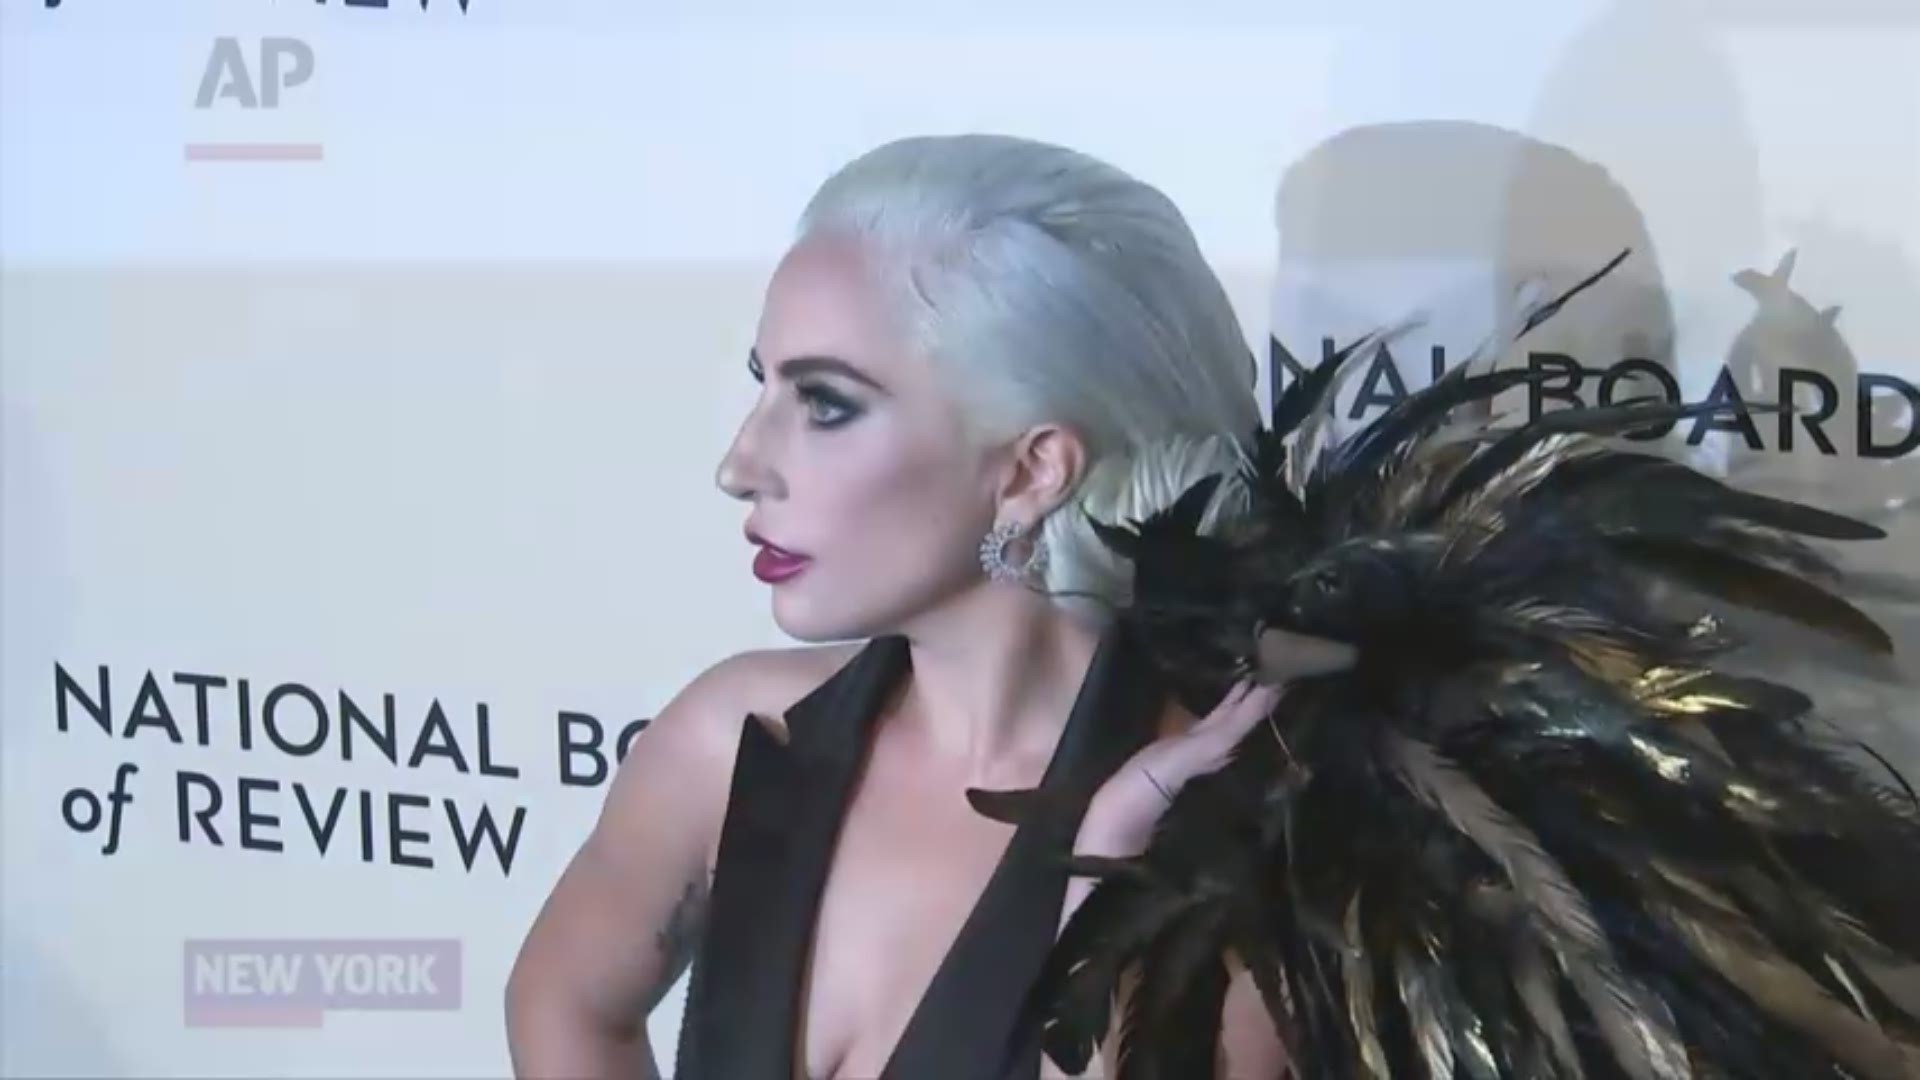 At the National Board of Review awards, best actress winner Lady Gaga talks about re-opening old wounds to appear in "A Star is Born" and Bradley Cooper reveals what pushed him to direct the drama, while Viggo Mortensen shares his misgivings before signing up for "Green Book." (AP)